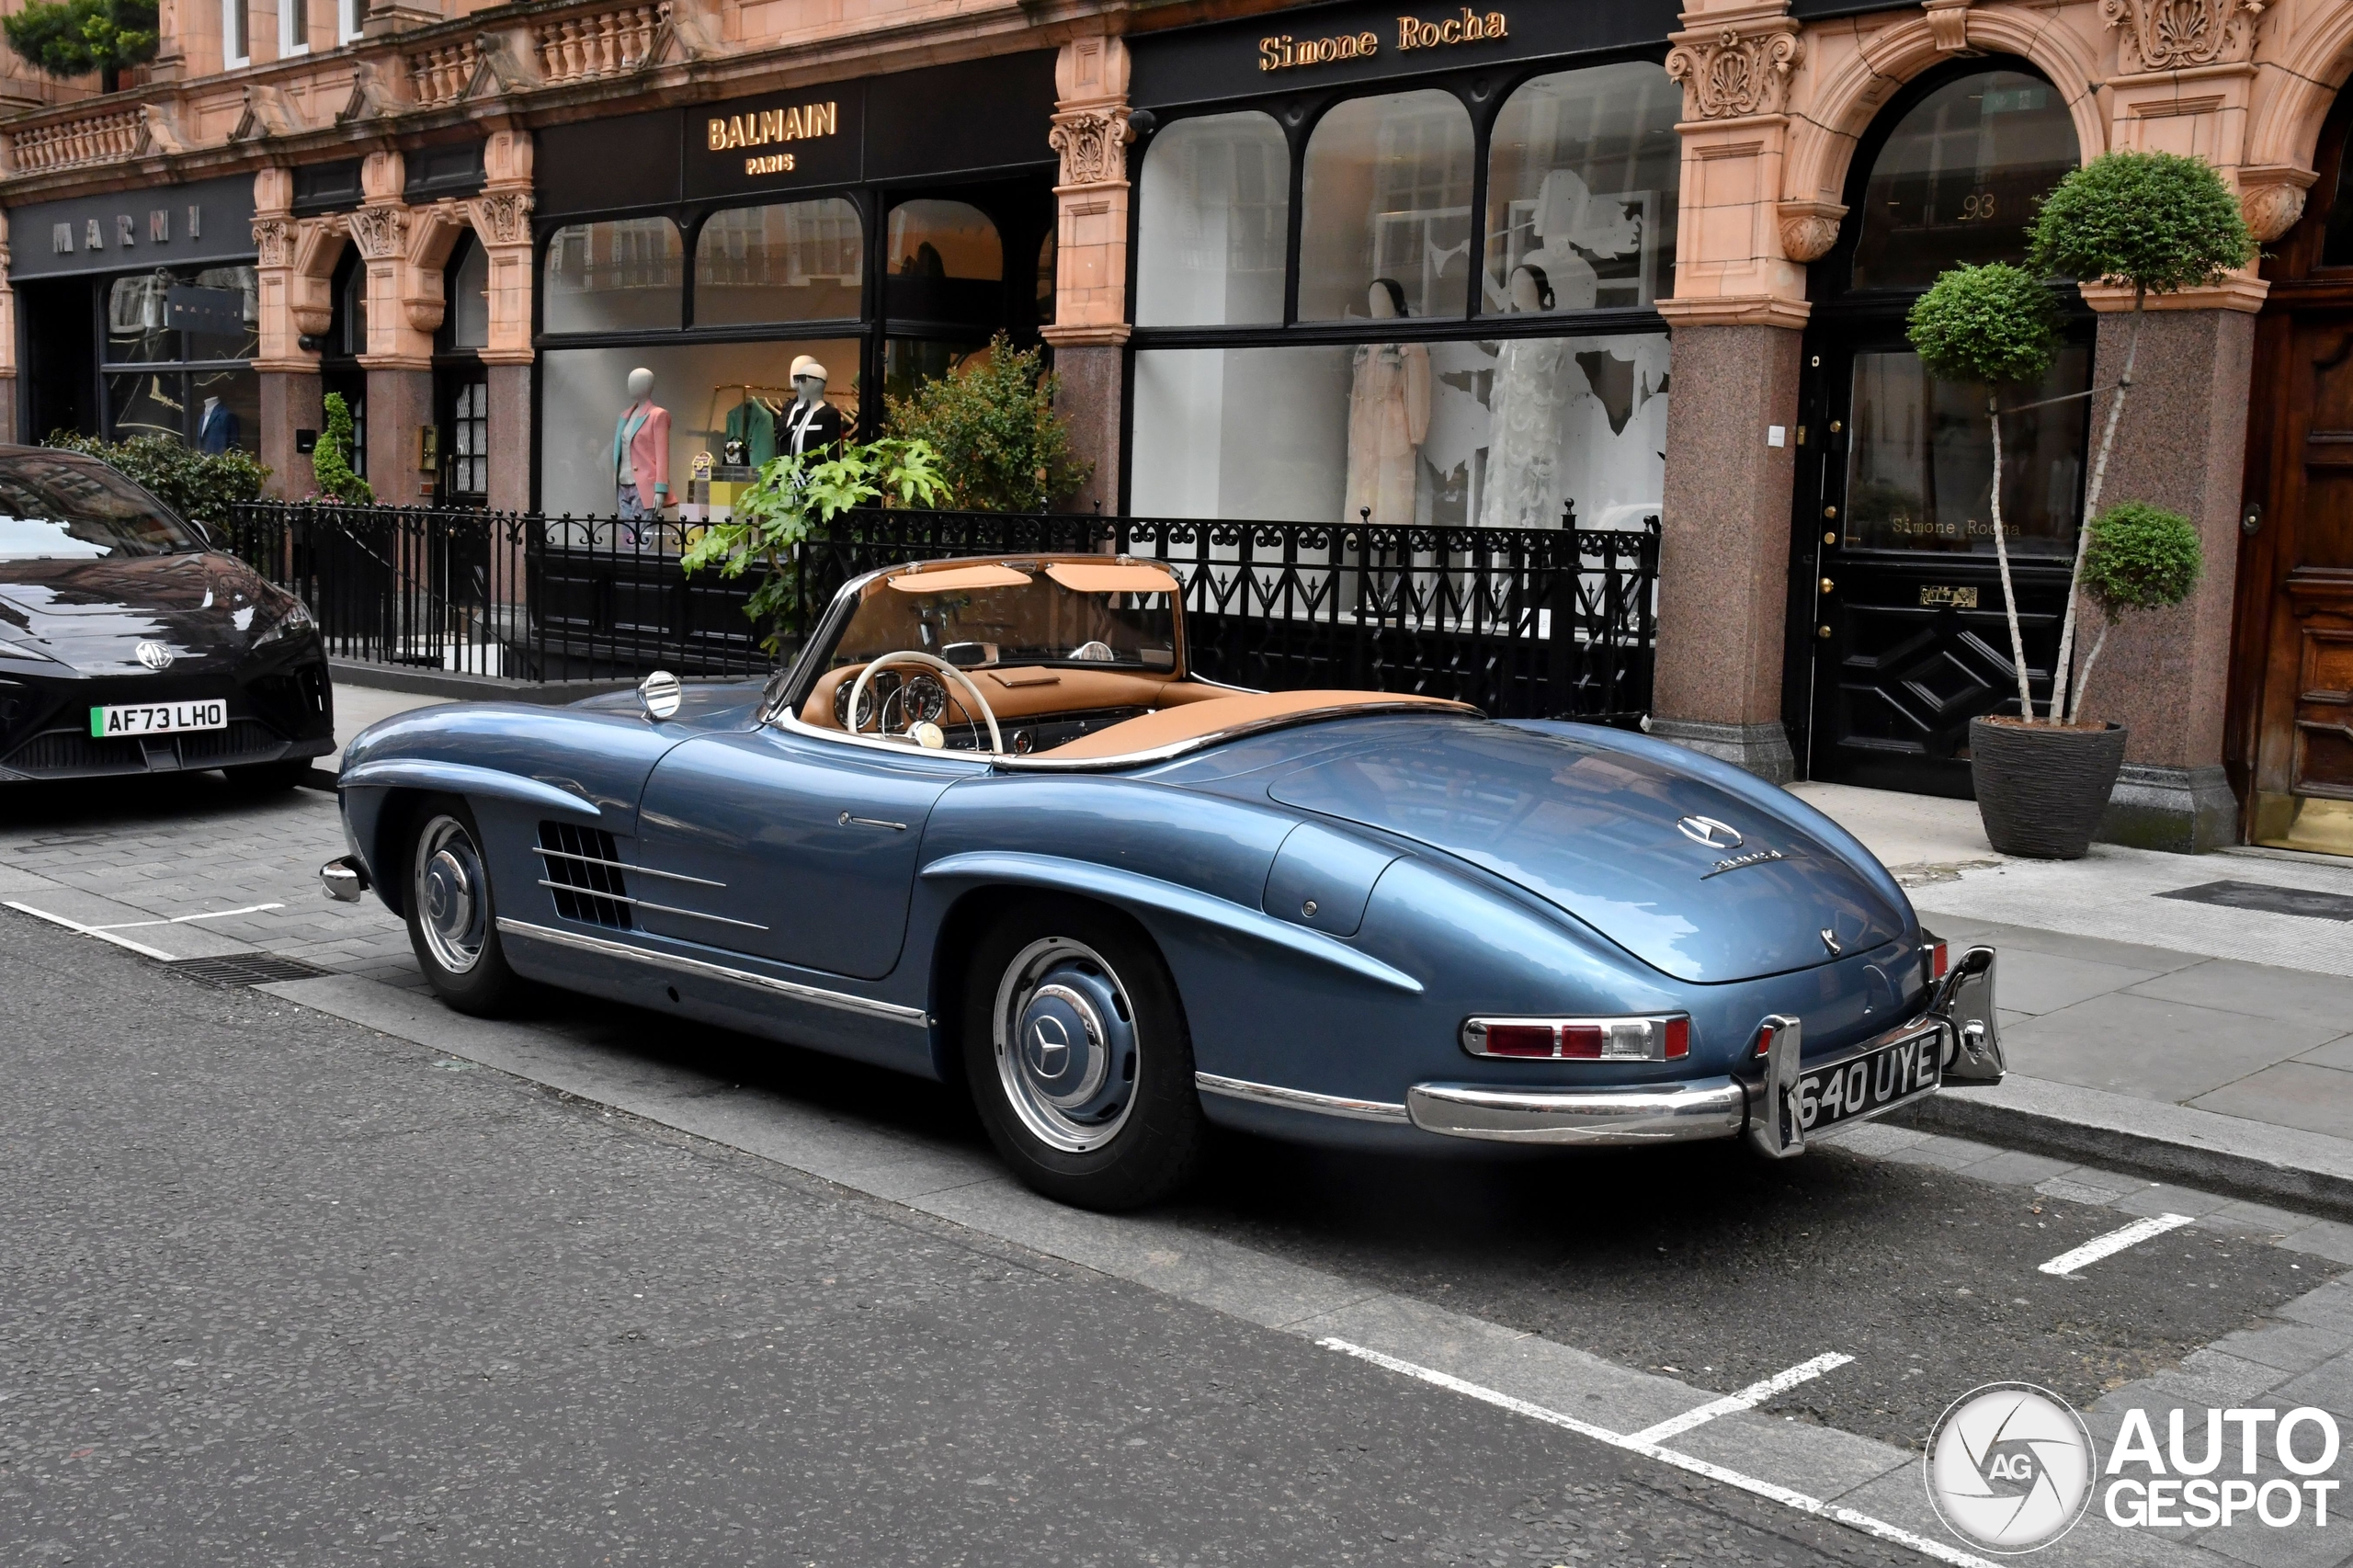 This 300 SL is quite perfect.